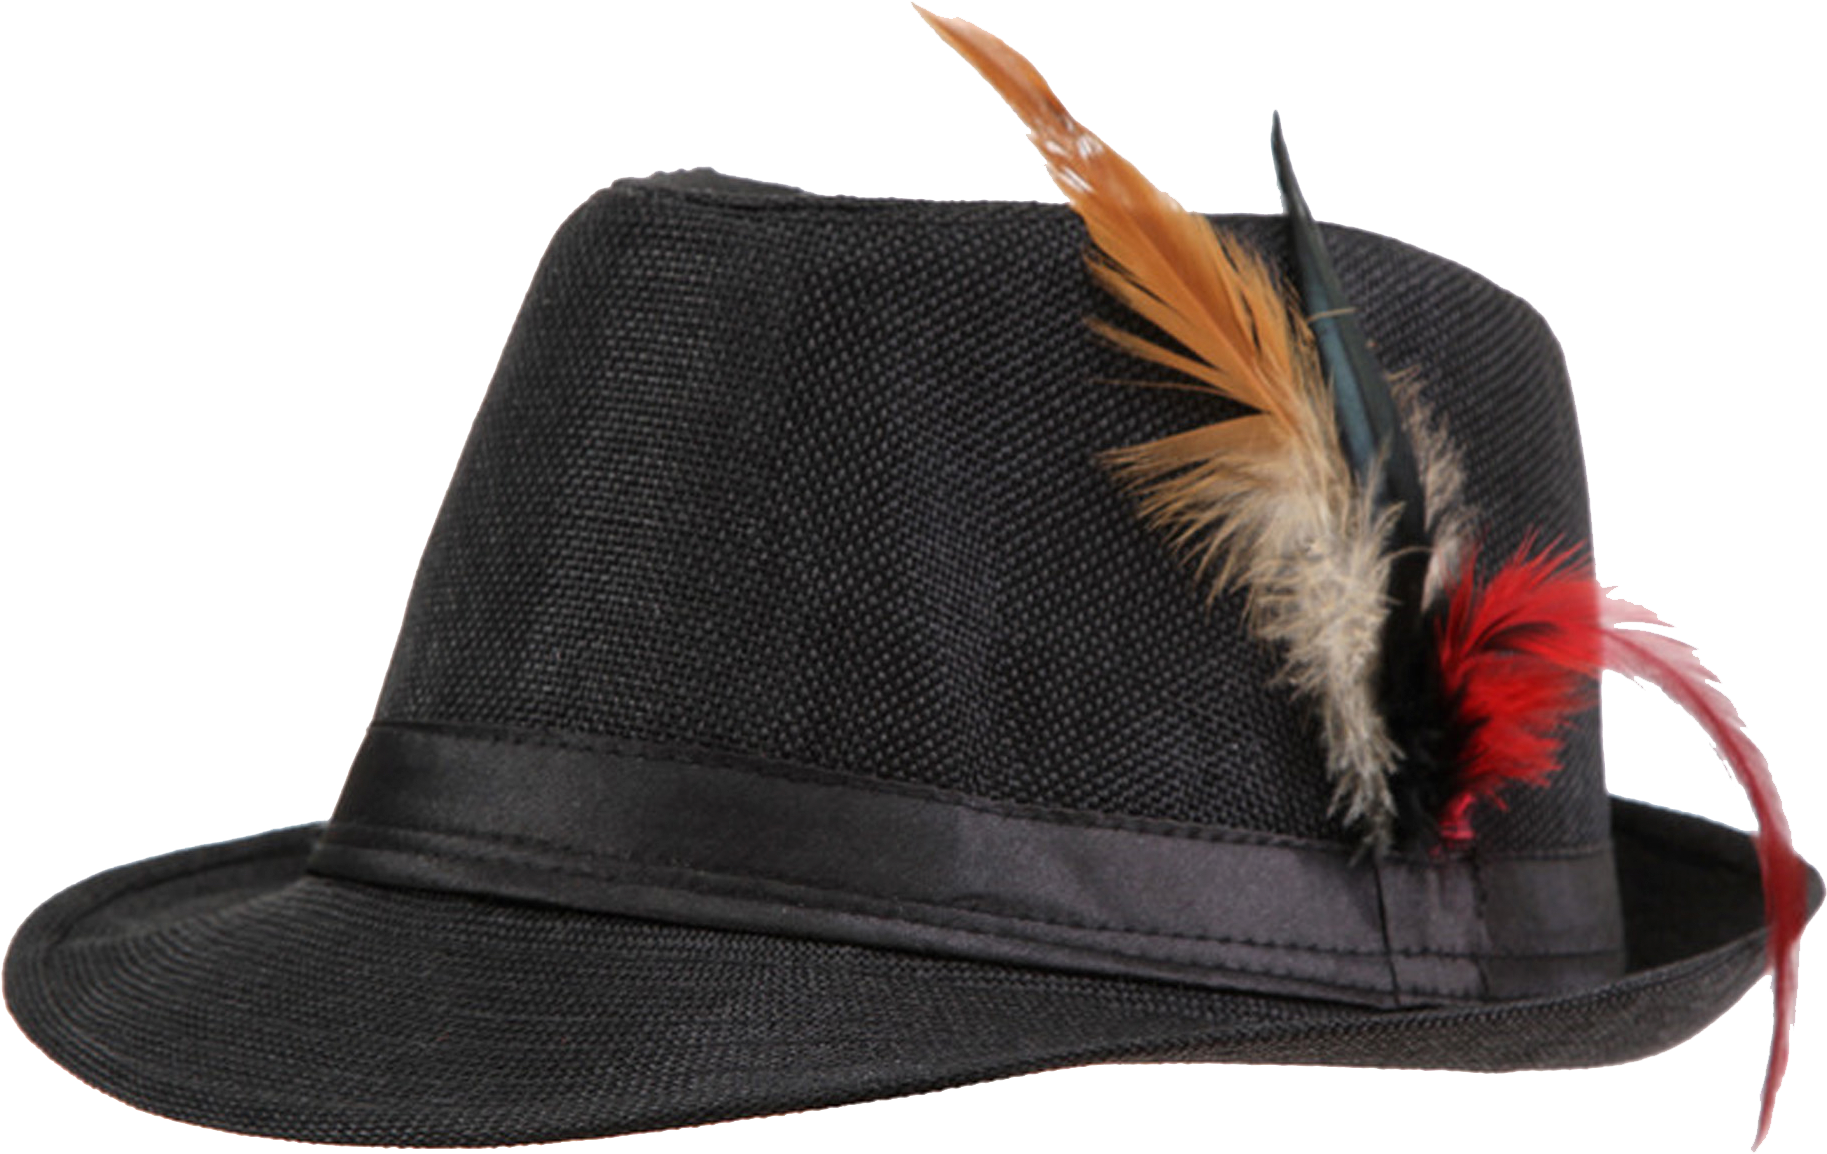 A Black Hat With Feathers On It